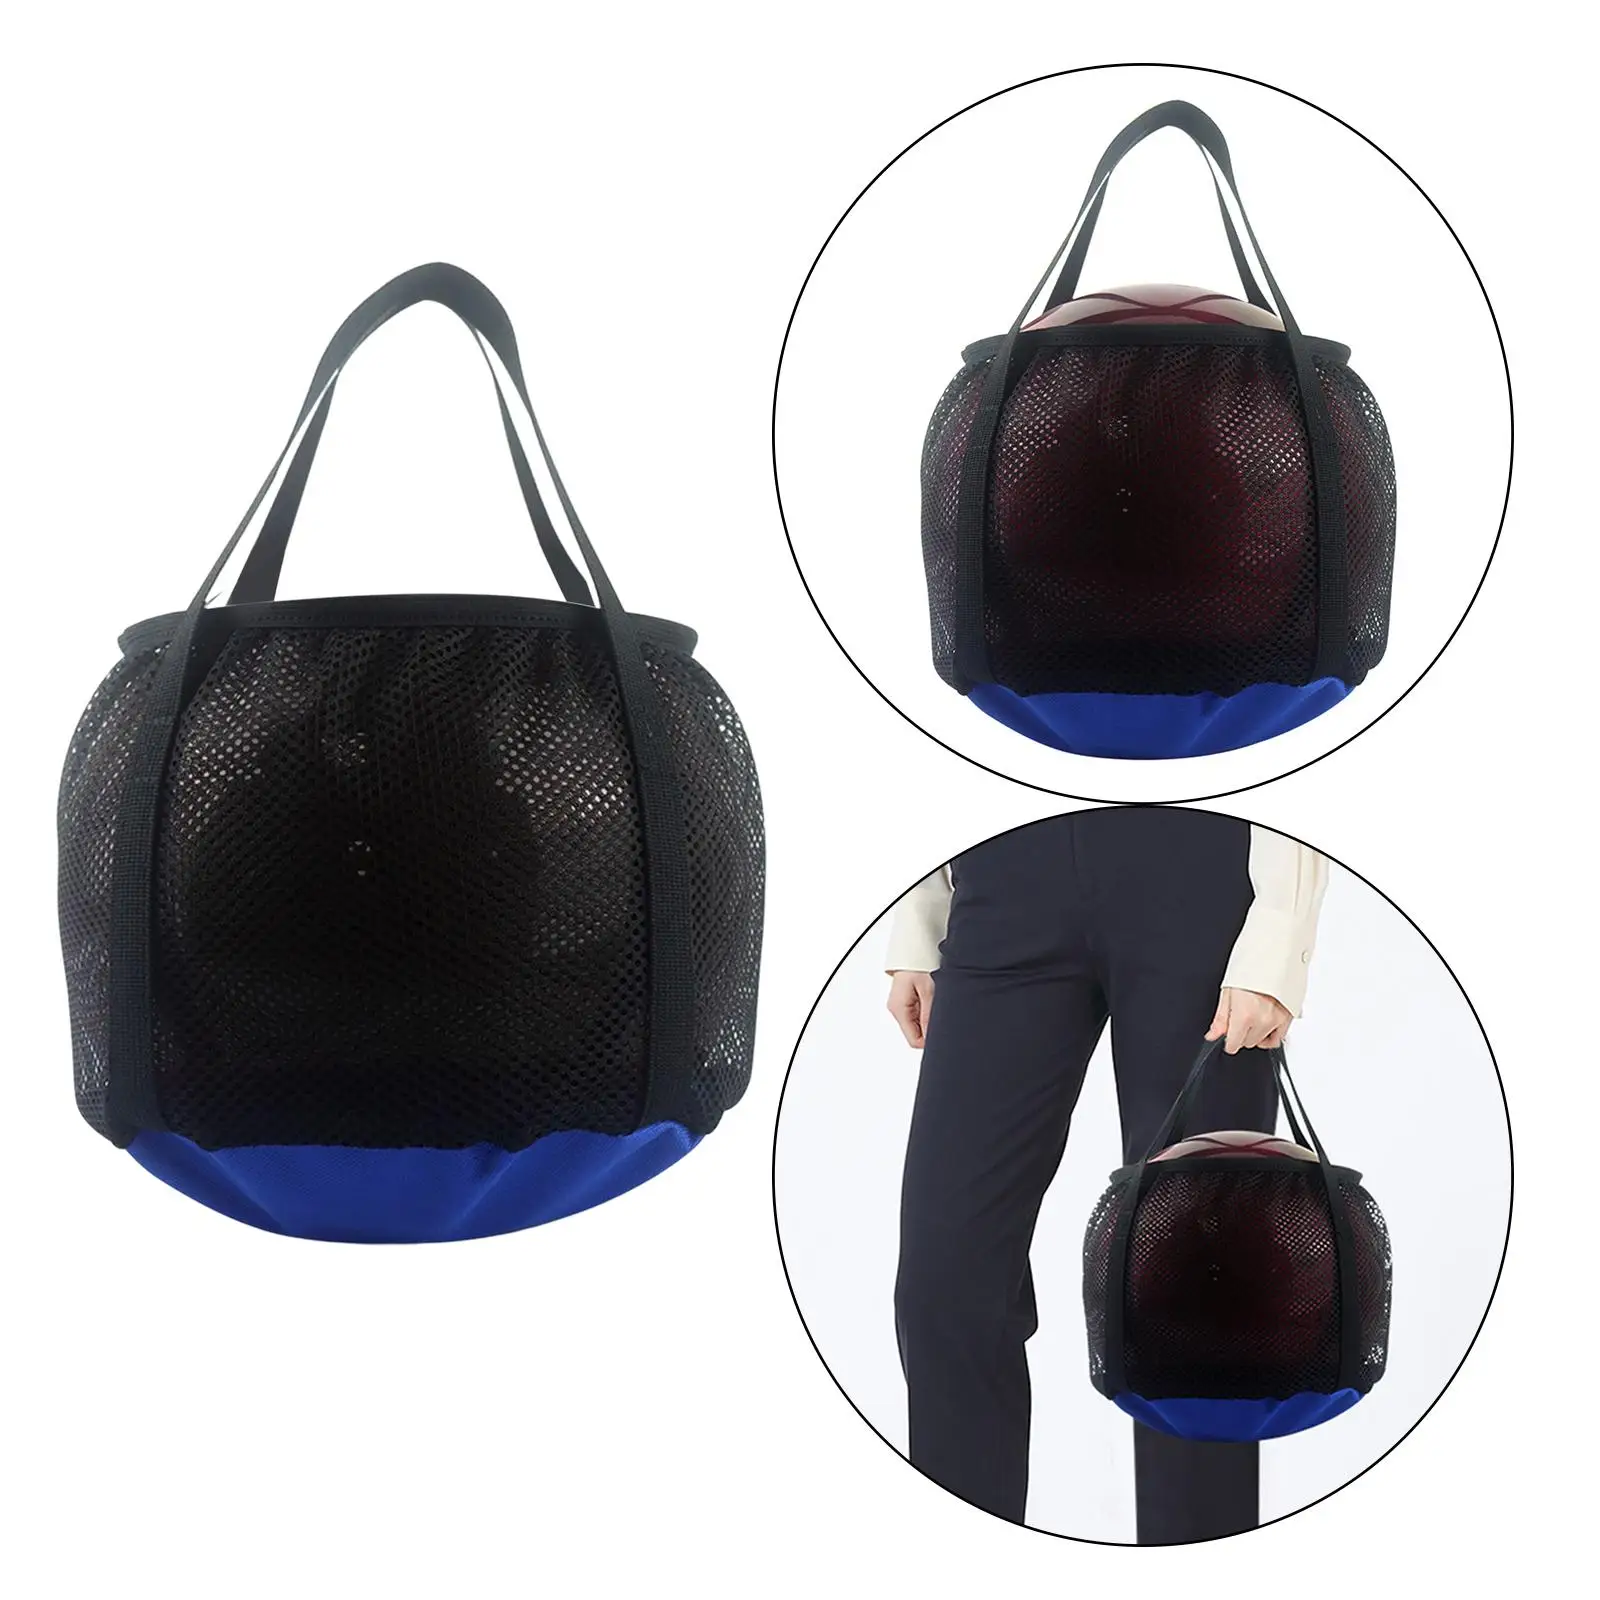 Oxford Bowling Ball Bags Handbag Sport Equipment with Handle Pocket Tote Portable for Gym Outdoor Single Ball Practice Training